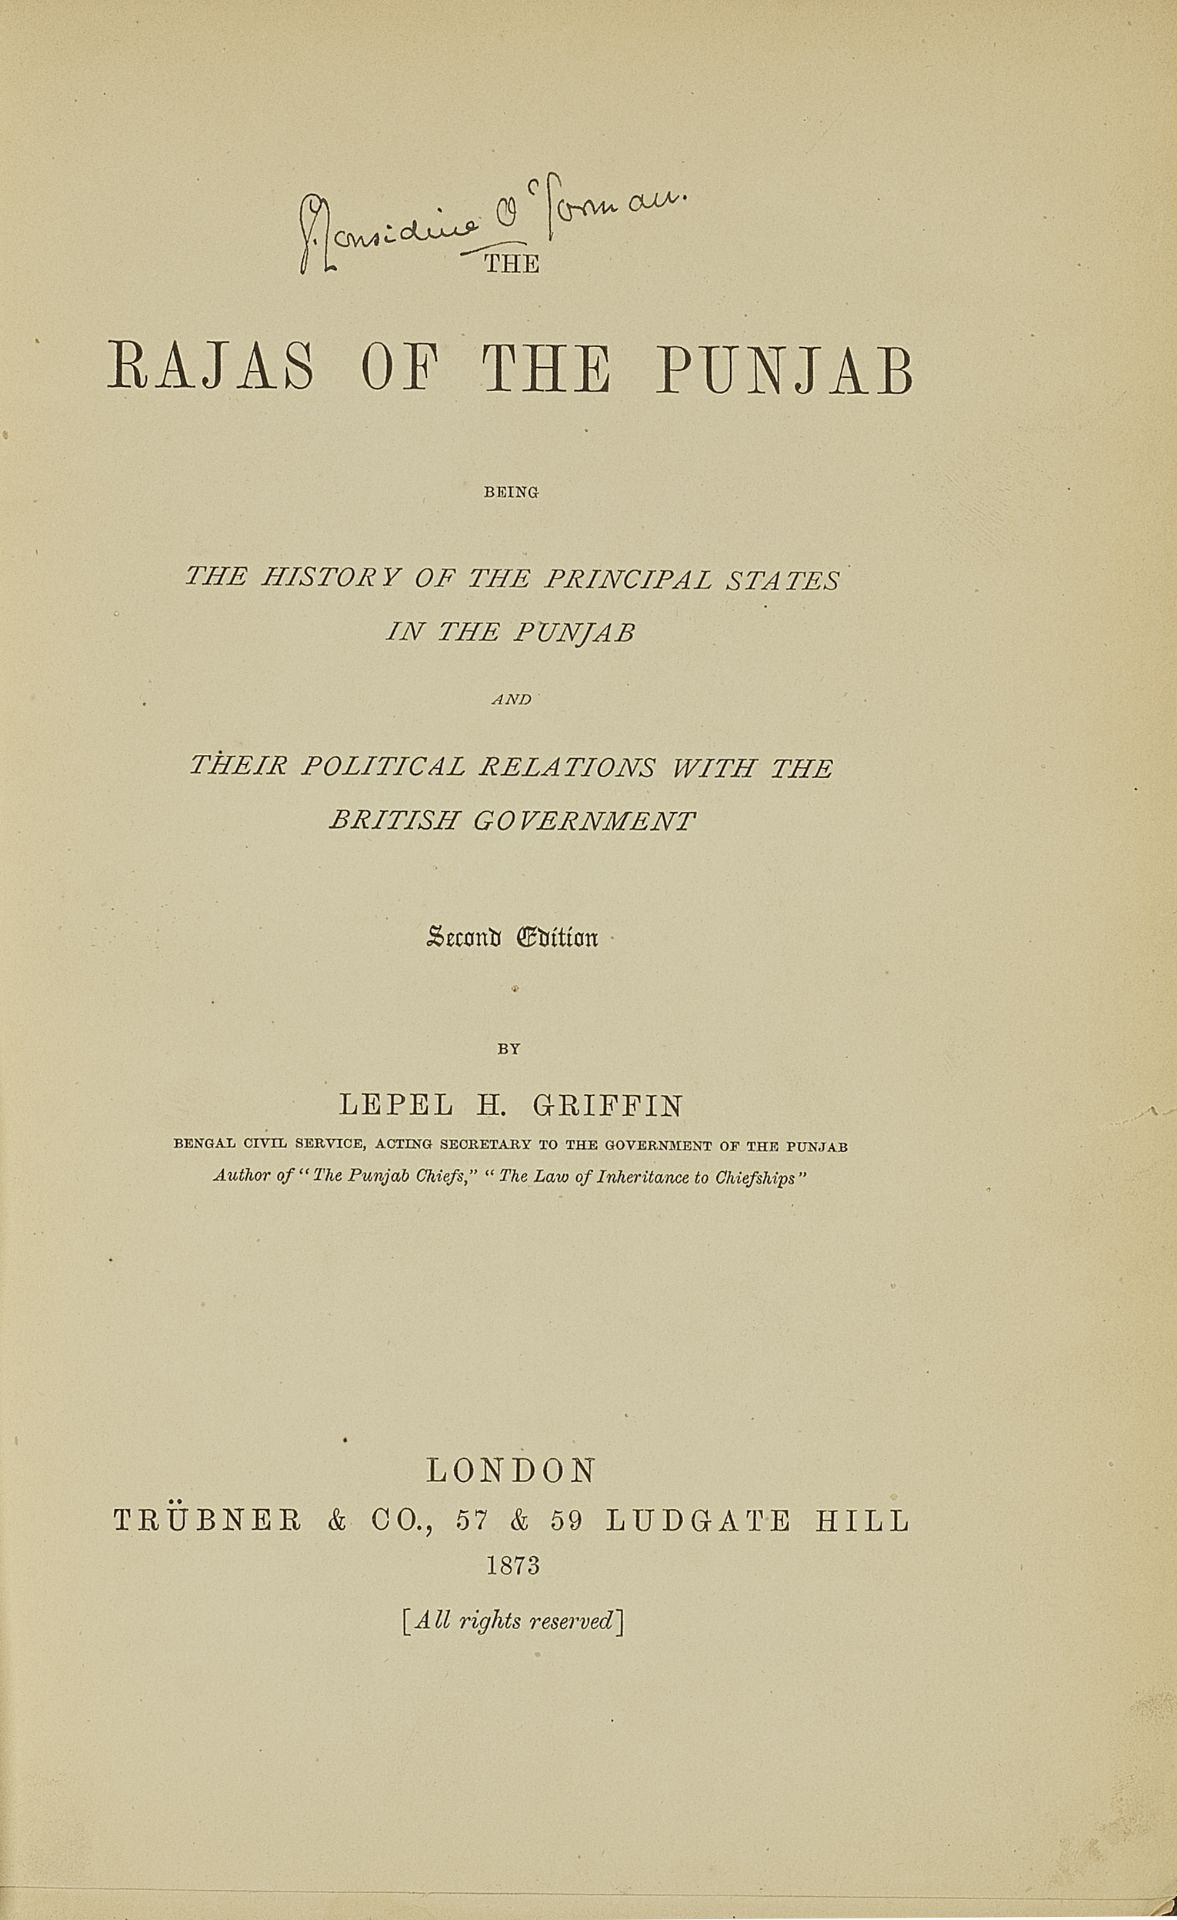 Lepel H. Griffin, The Rajas of the Punjab London, Trubner & Co., 1873